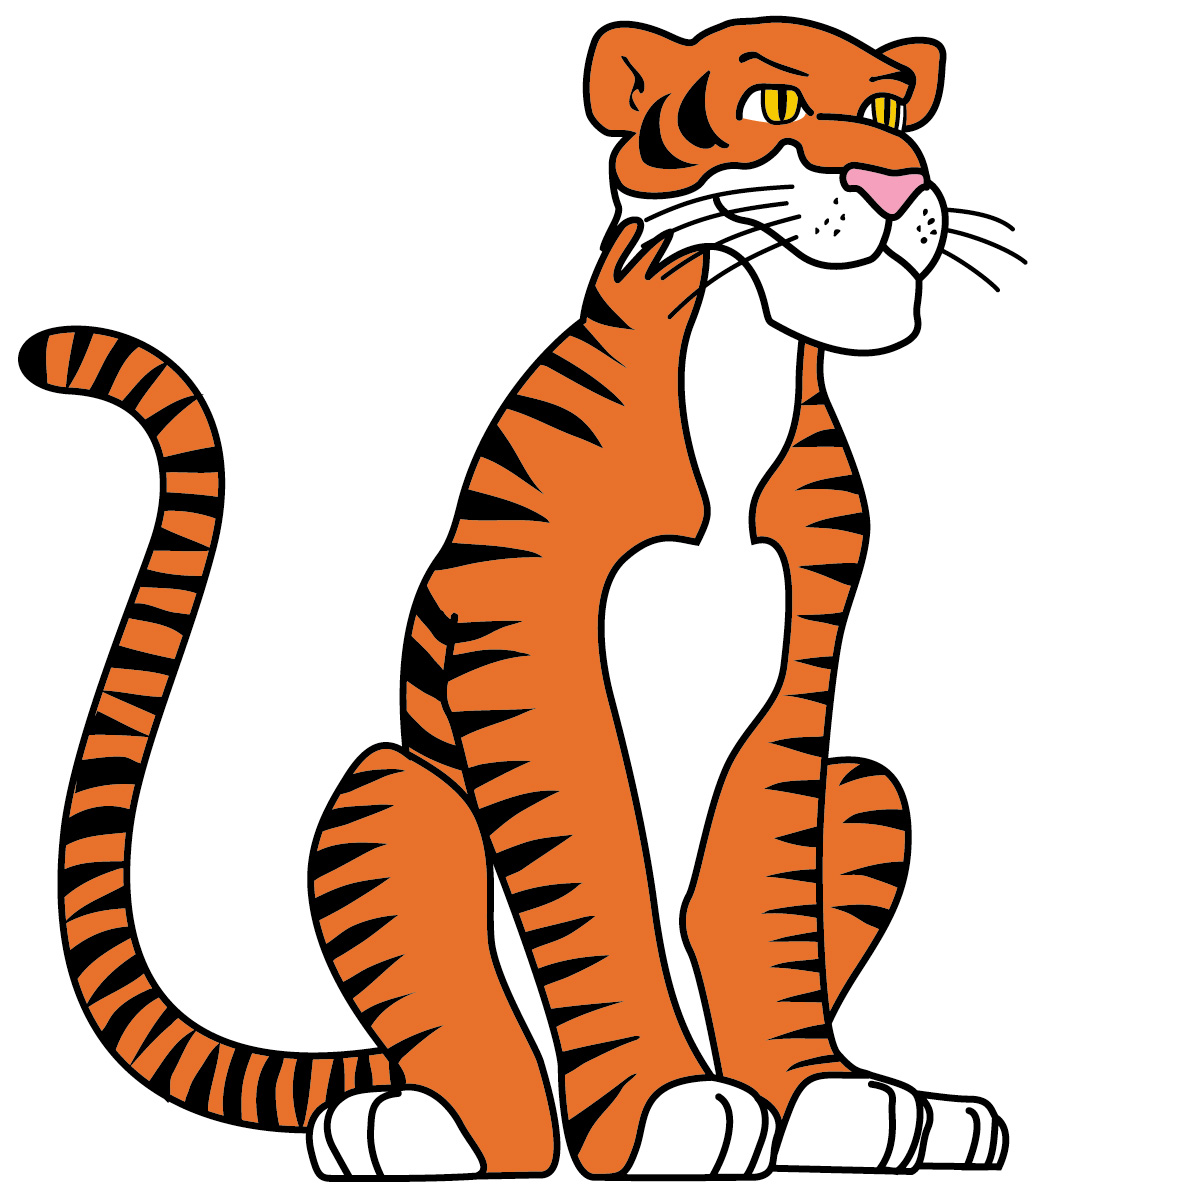 Baby Tiger Face Clip Art | Clipart Panda - Free Clipart Images